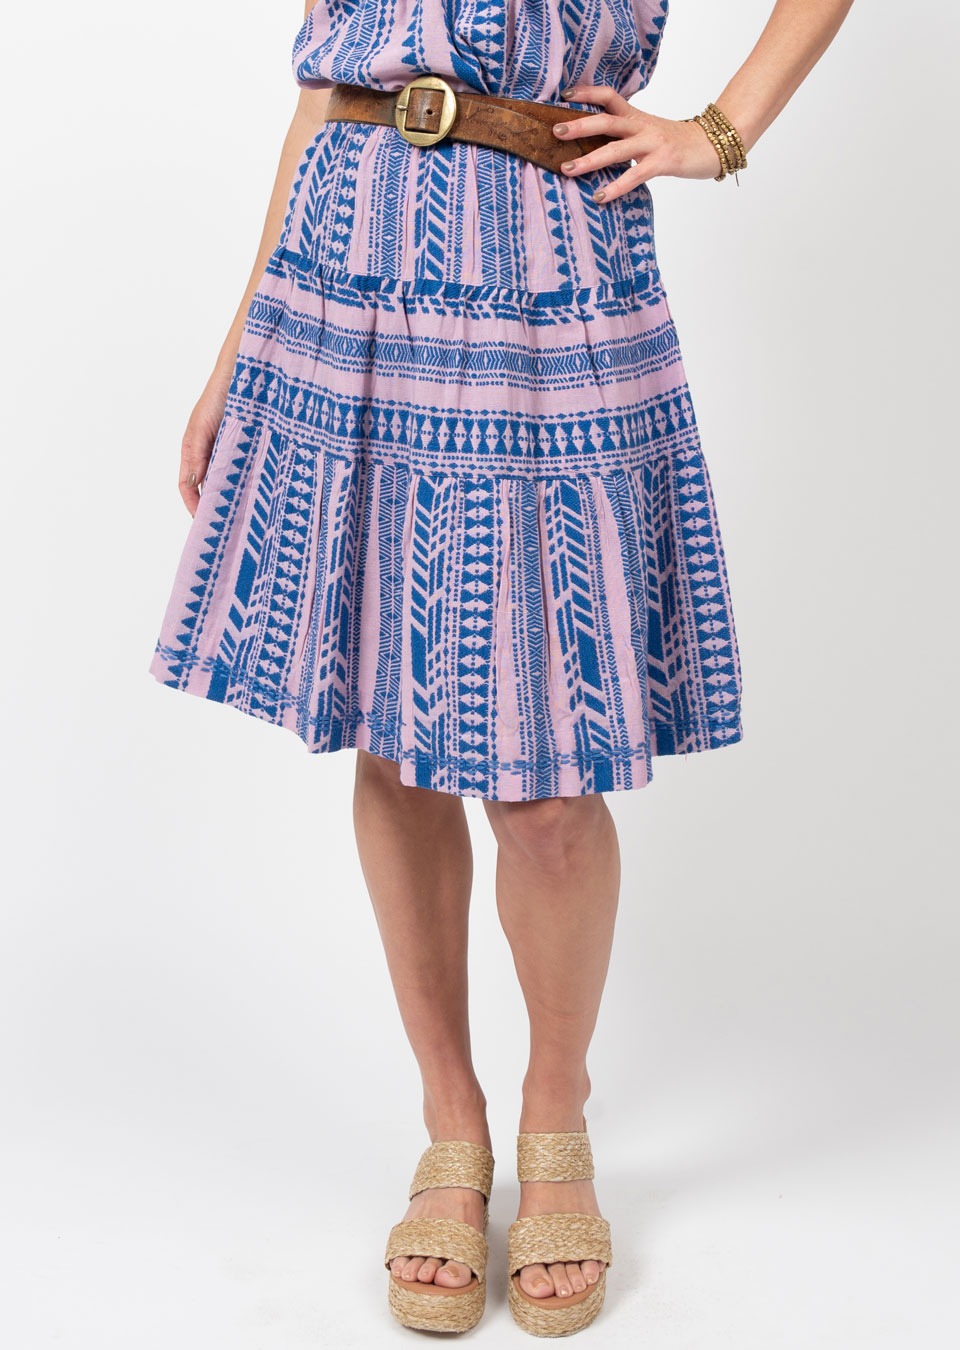 Ivy Jane / Uncle Frank Tiered Stitched Hem Skirt  - The Attic Boutique